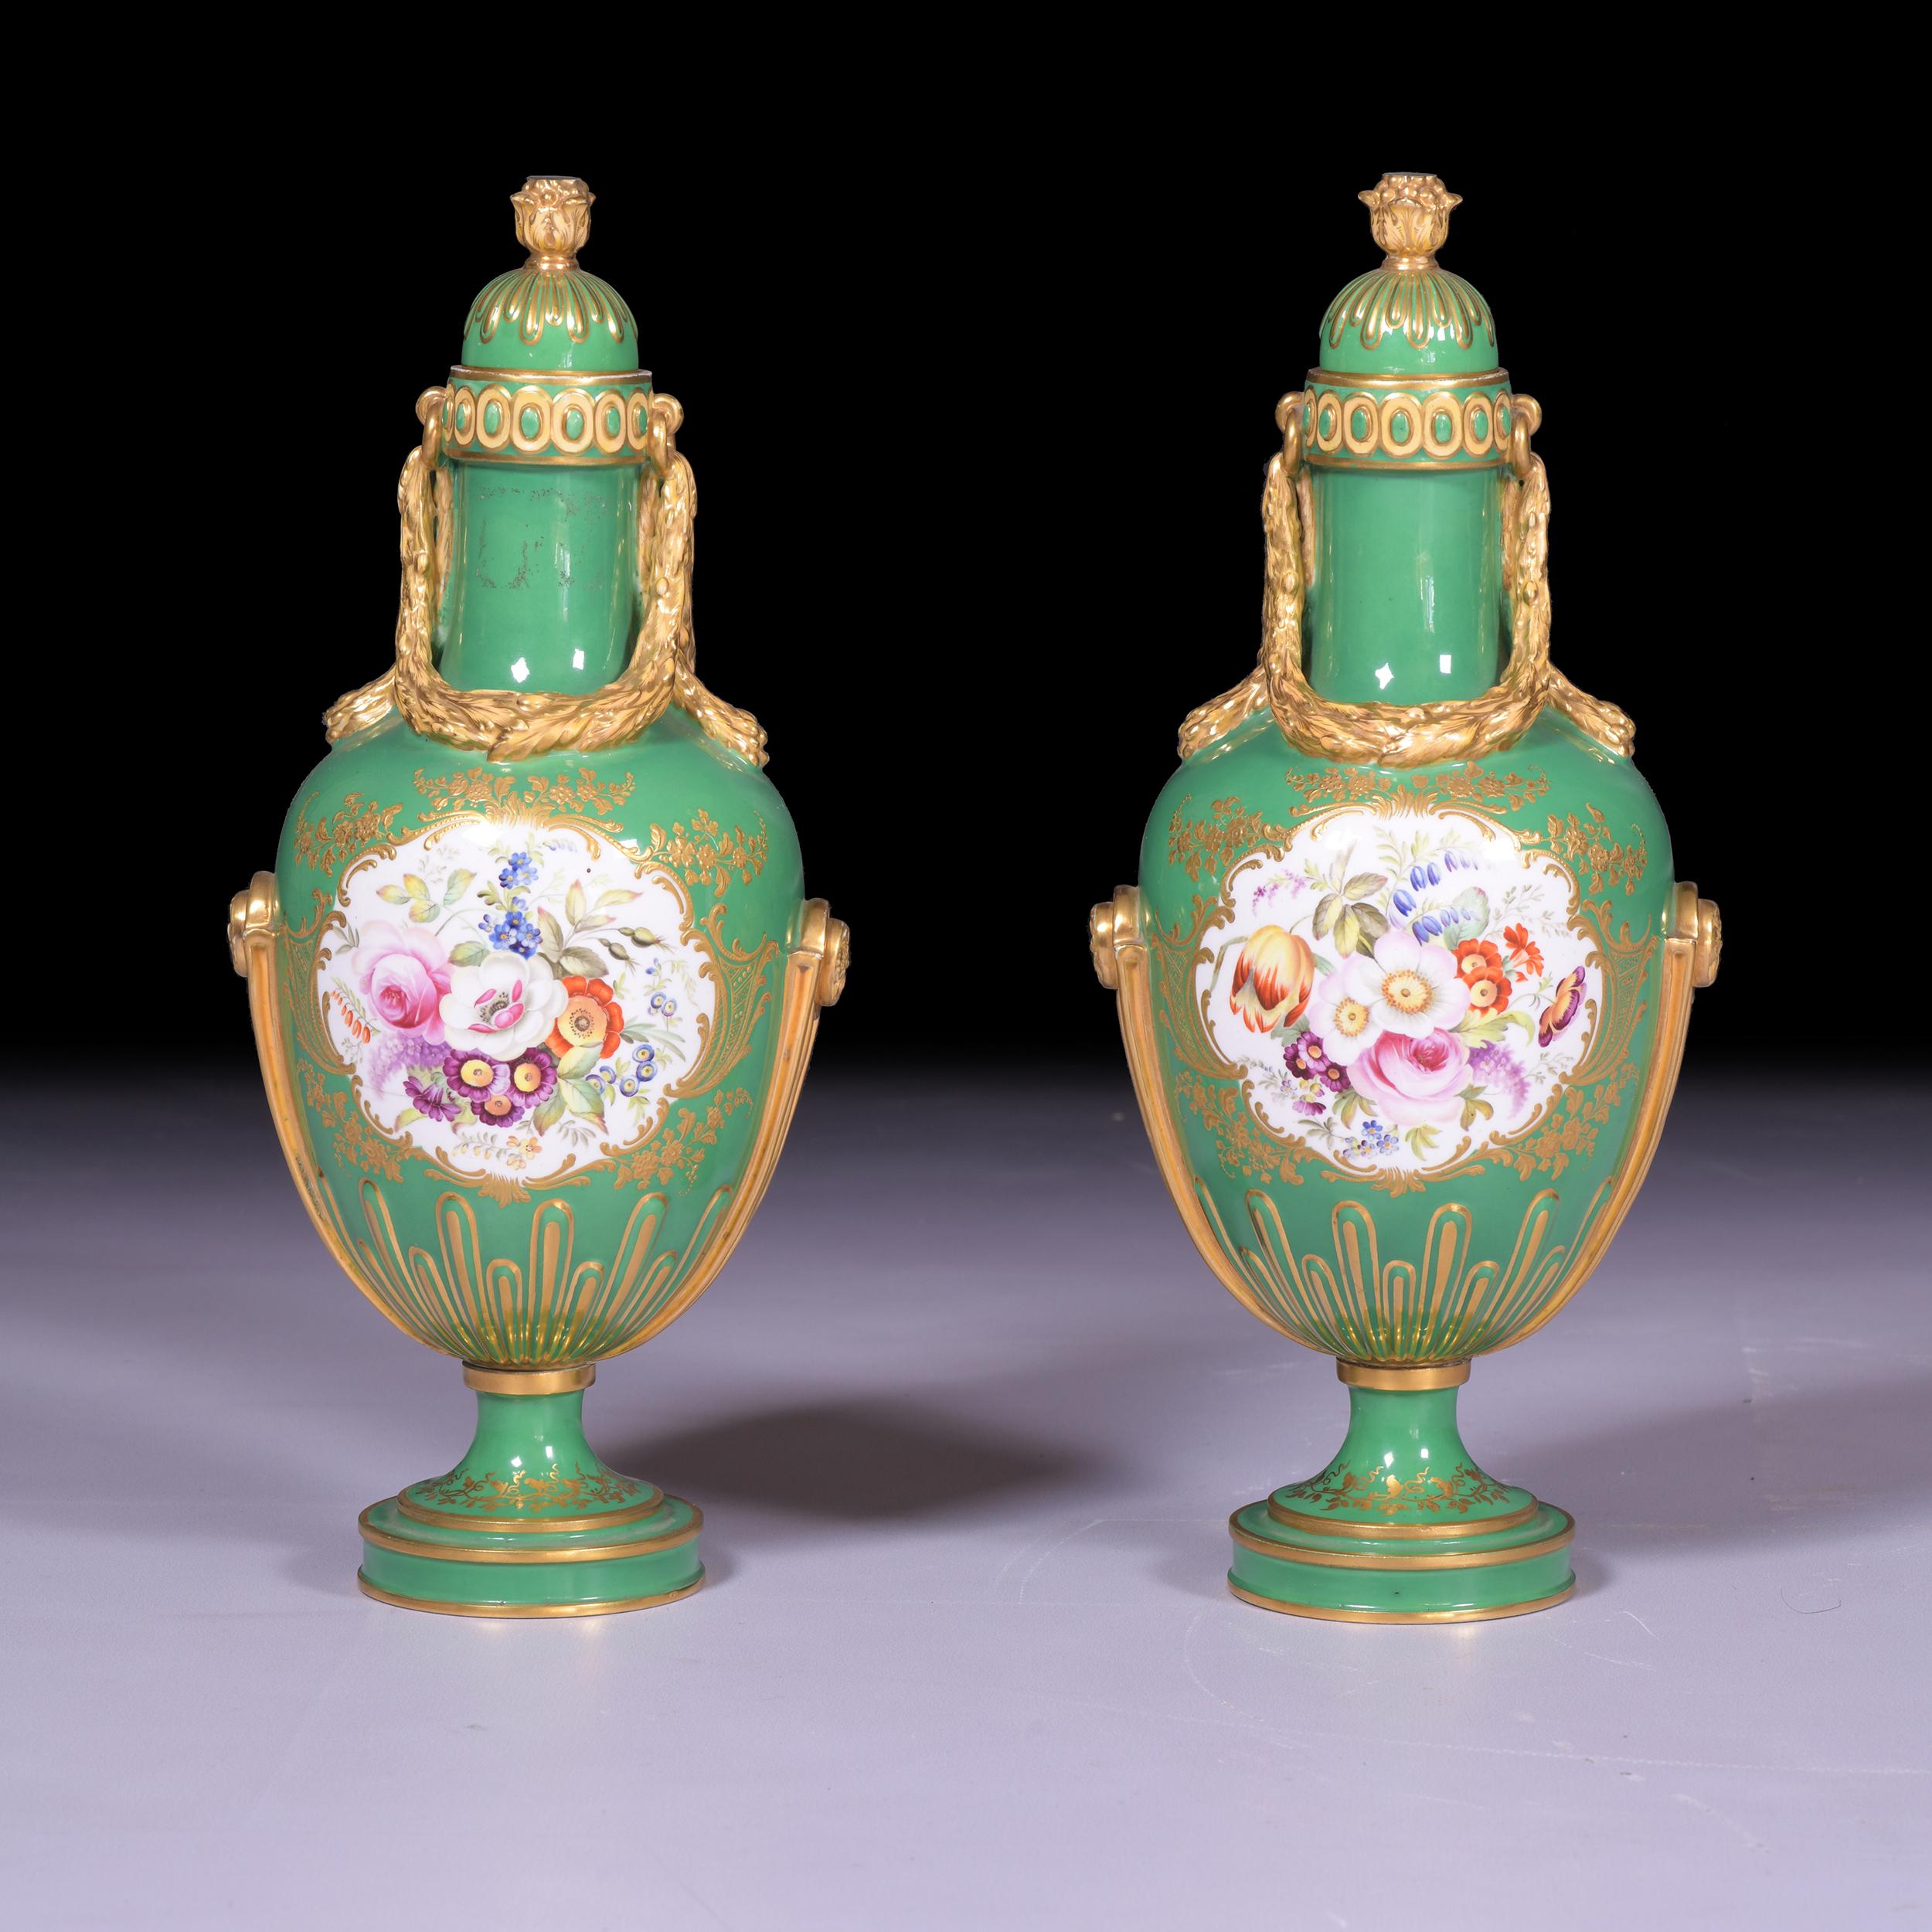 Pair Of 19th Century English Porcelain Vases & Covers By Coalport For Sale 3